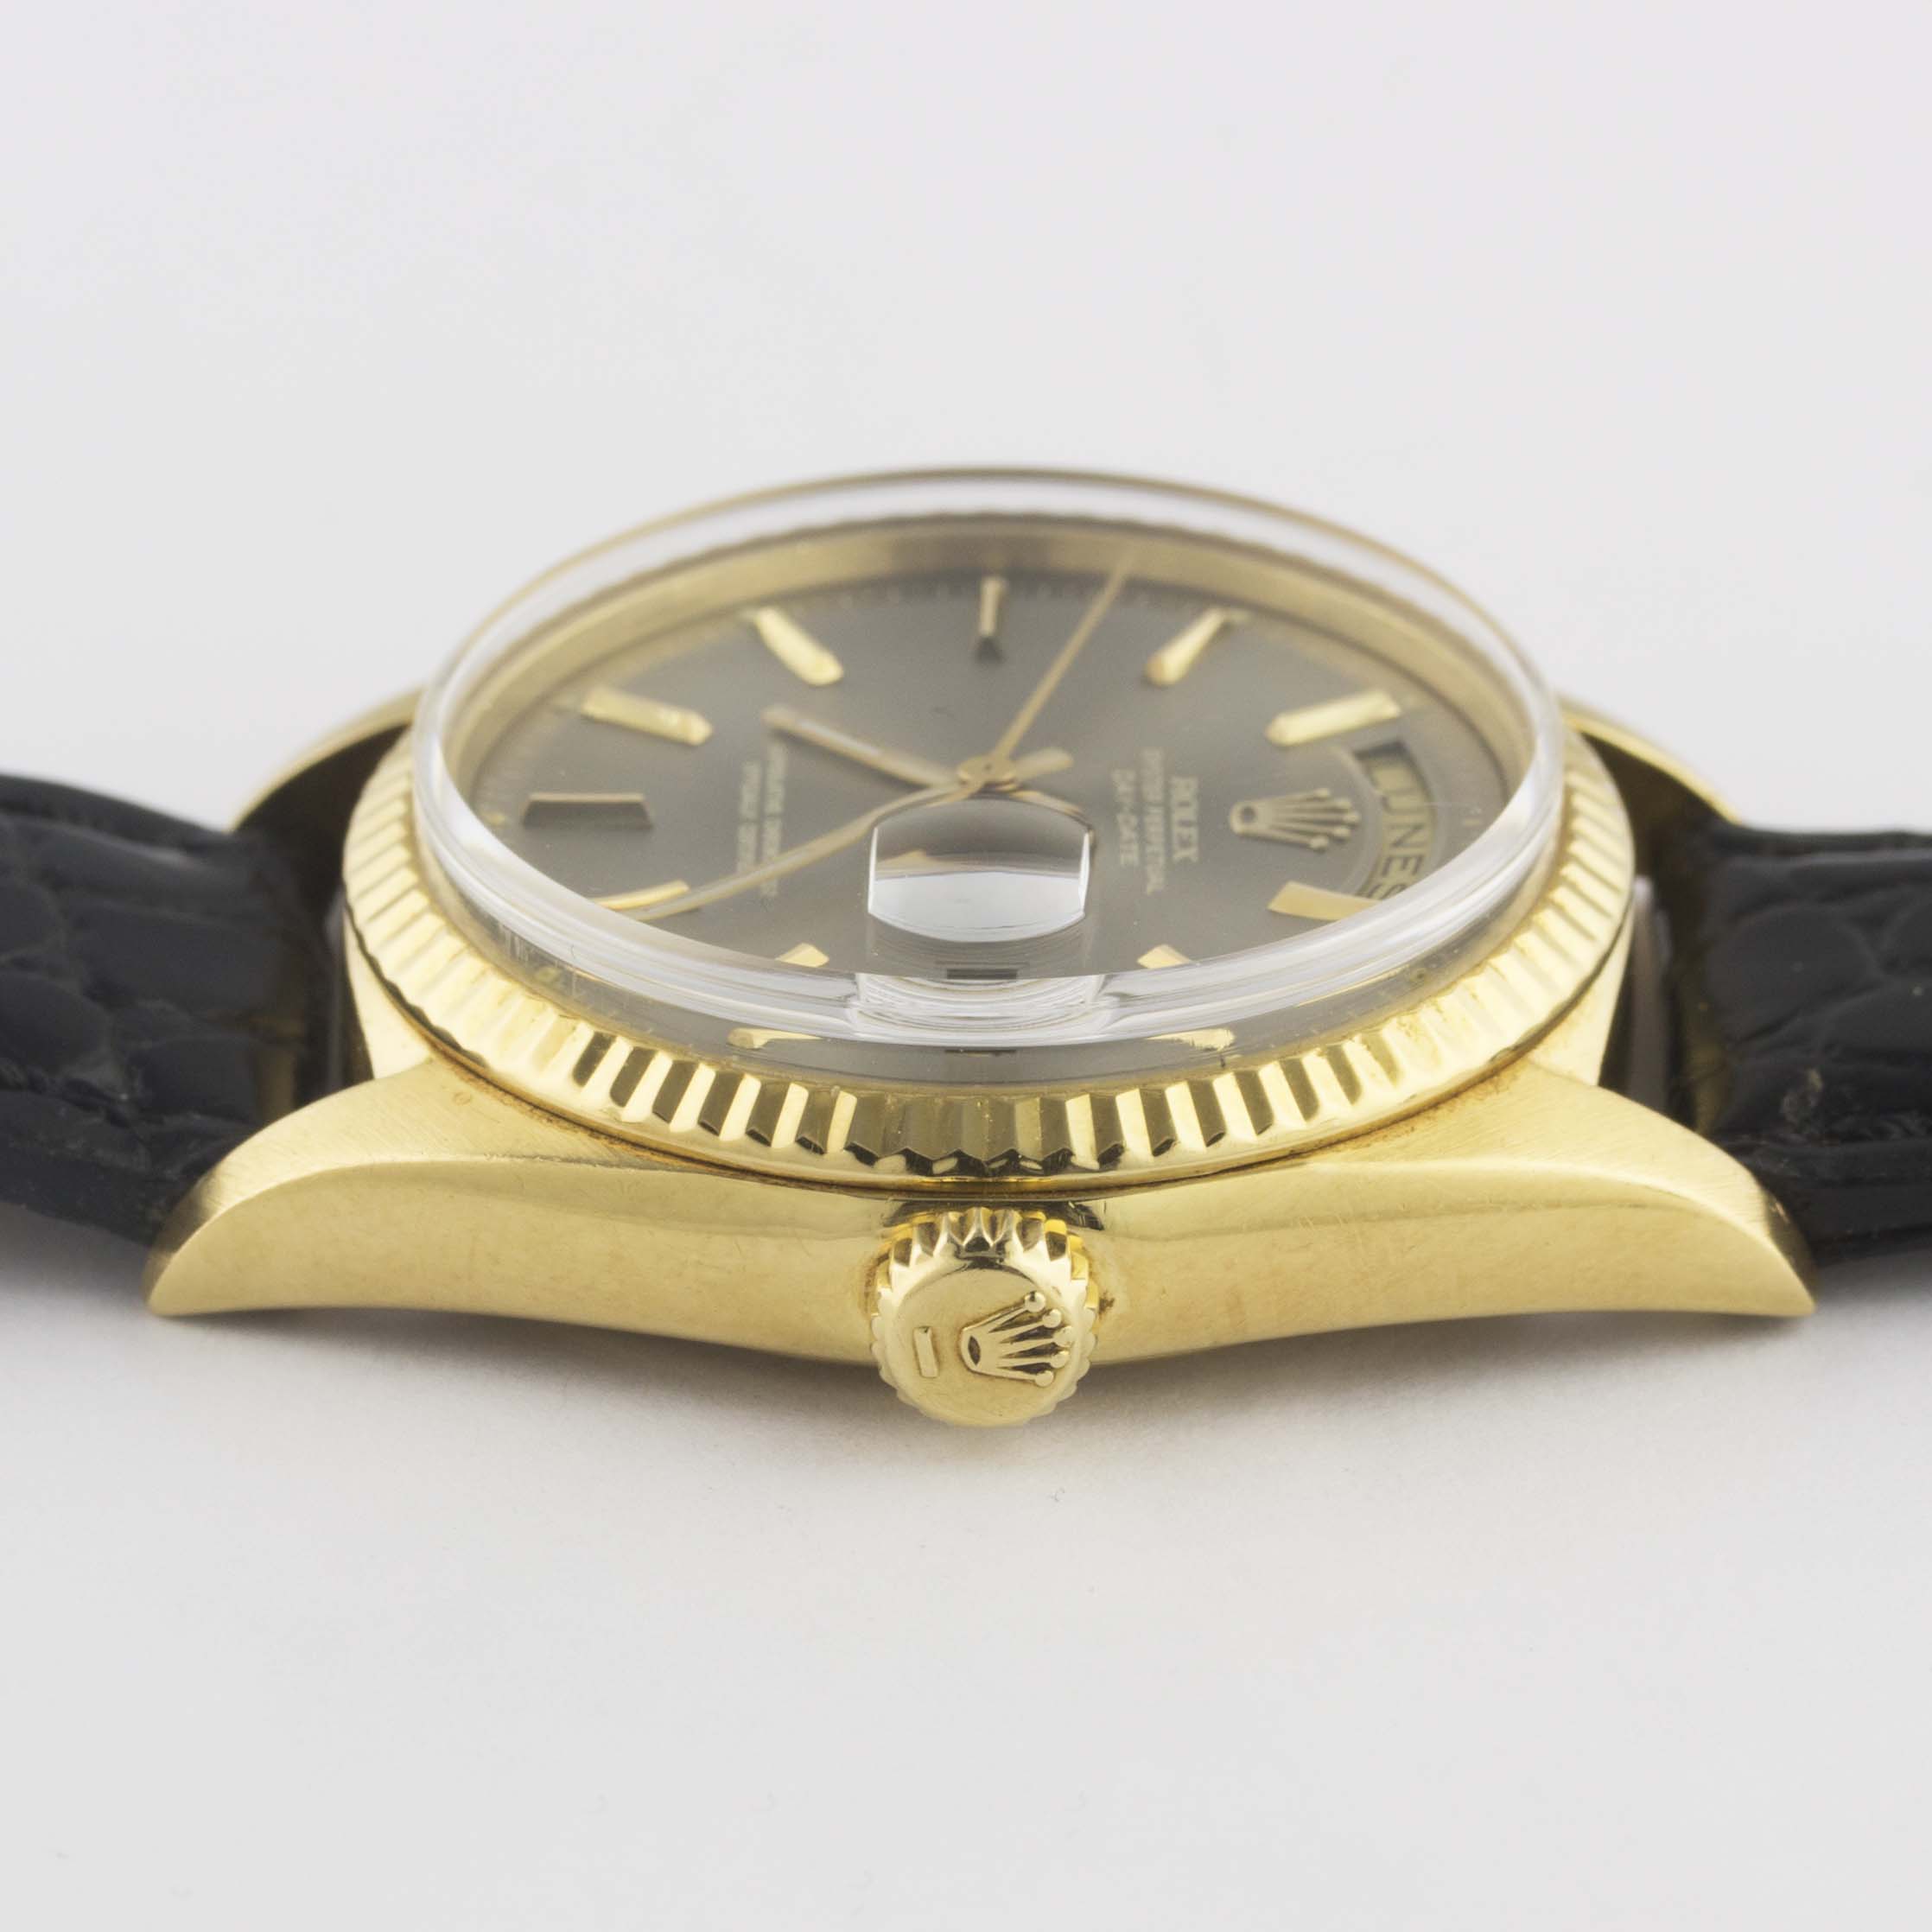 A RARE GENTLEMAN'S 18K SOLID GOLD ROLEX OYSTER PERPETUAL DAY DATE WRIST WATCH CIRCA 1972, REF. - Image 10 of 11